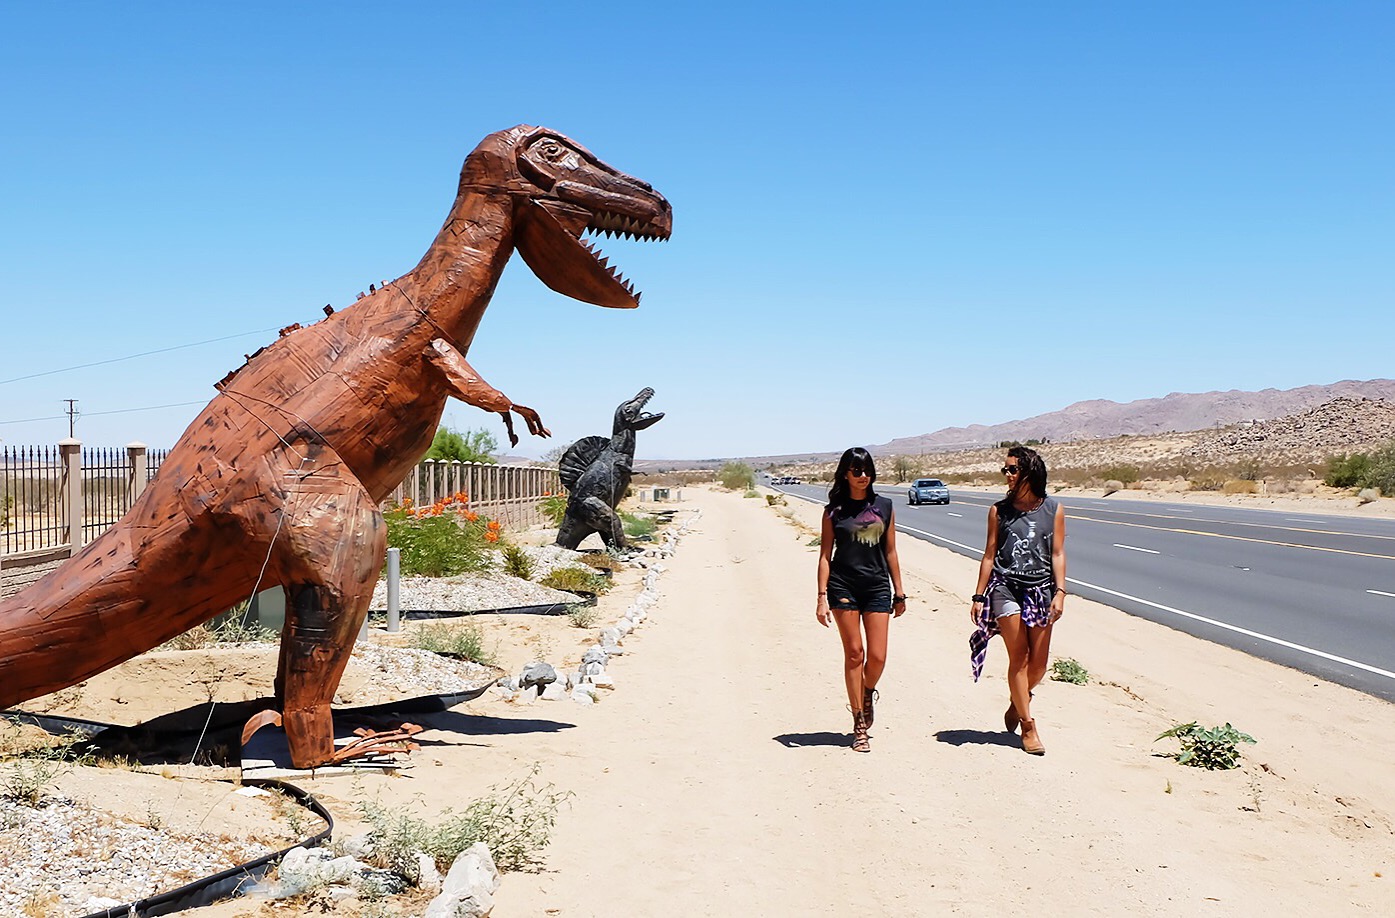 Visit the Dinosaurs of 29 Palms